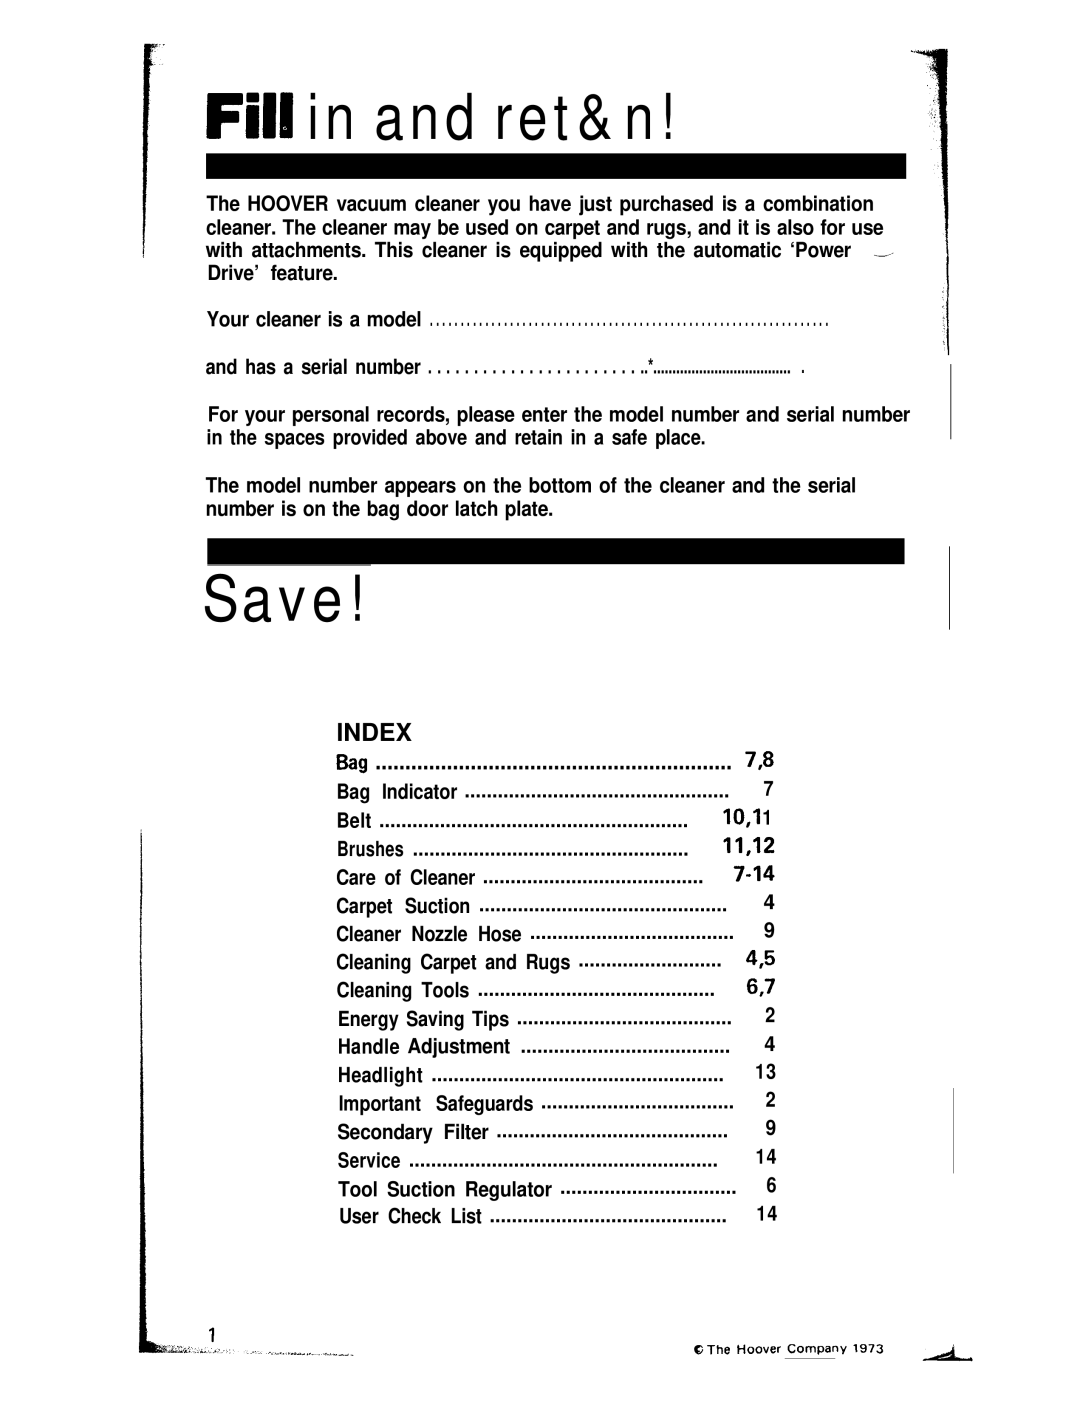 Hoover U6049 manual Fill in and ret&n, Index 